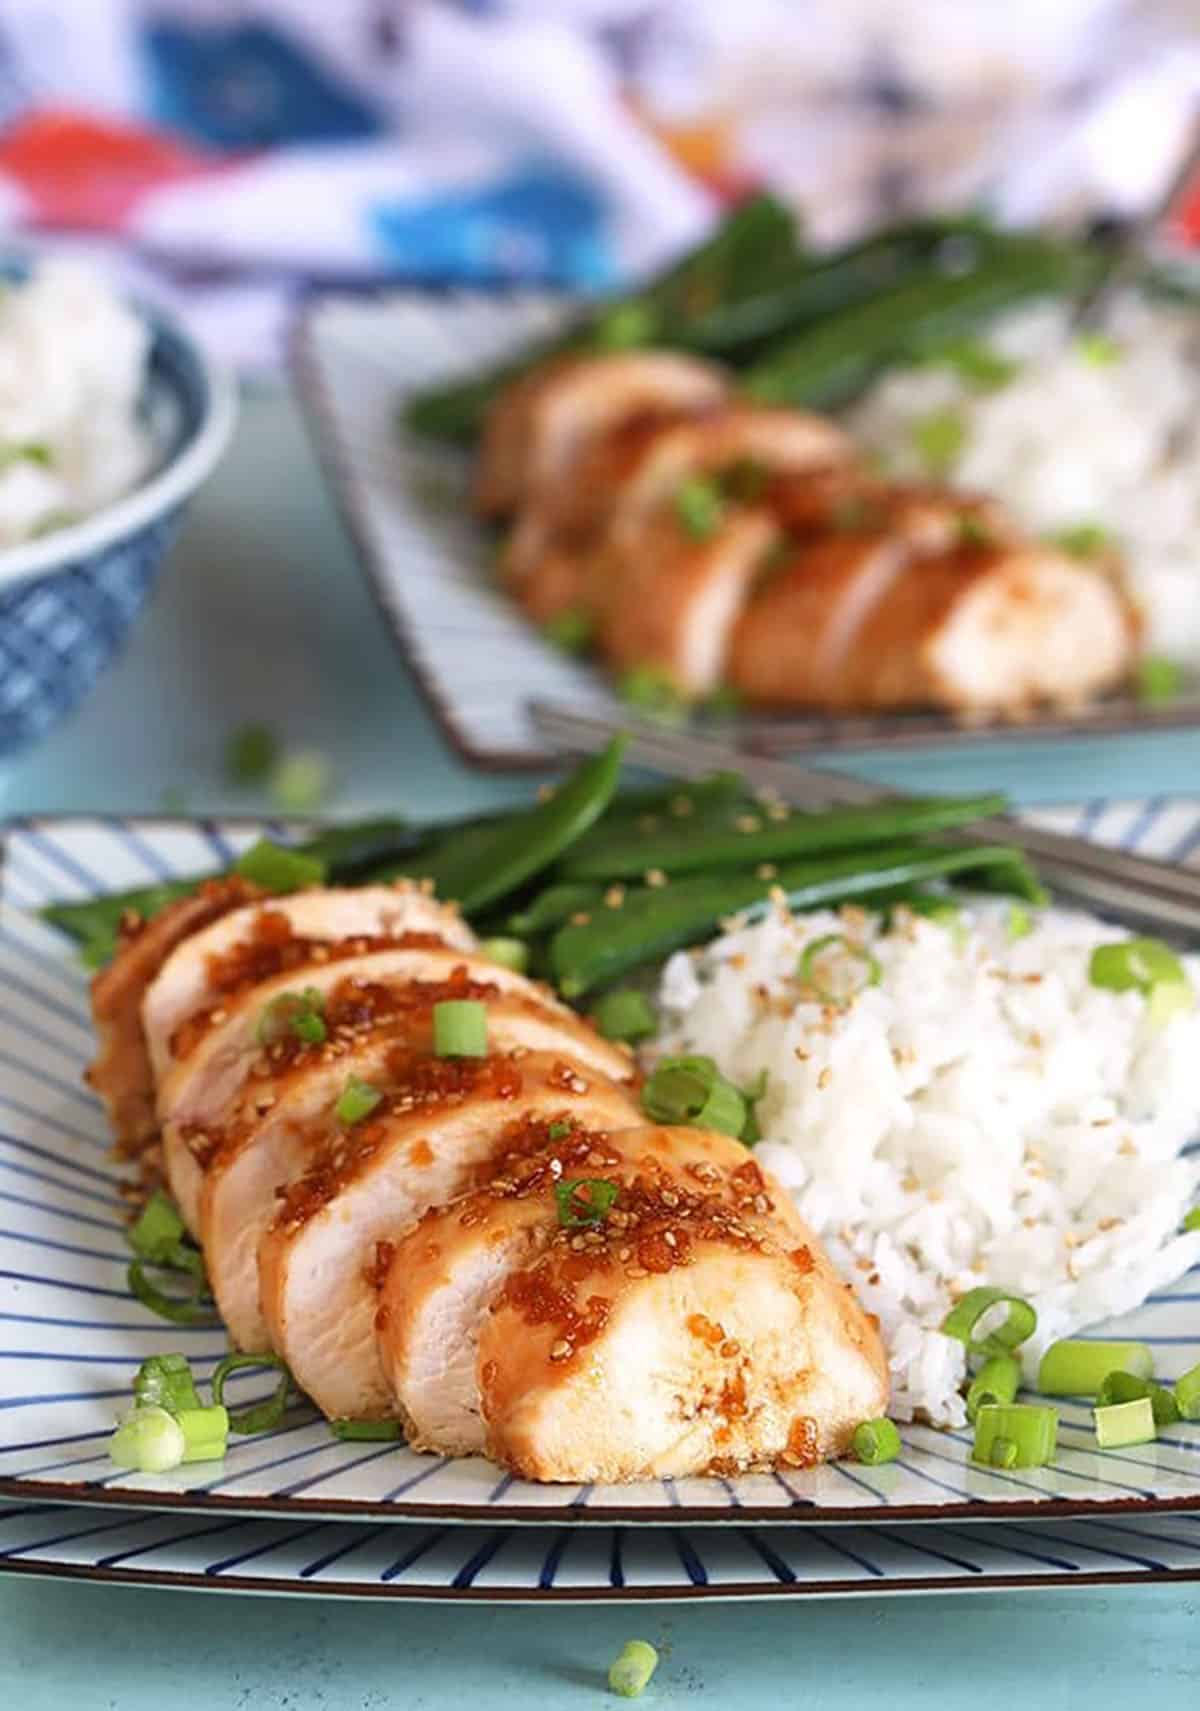 Sliced Teriyaki Chicken breast on a plate with rice and green beans.